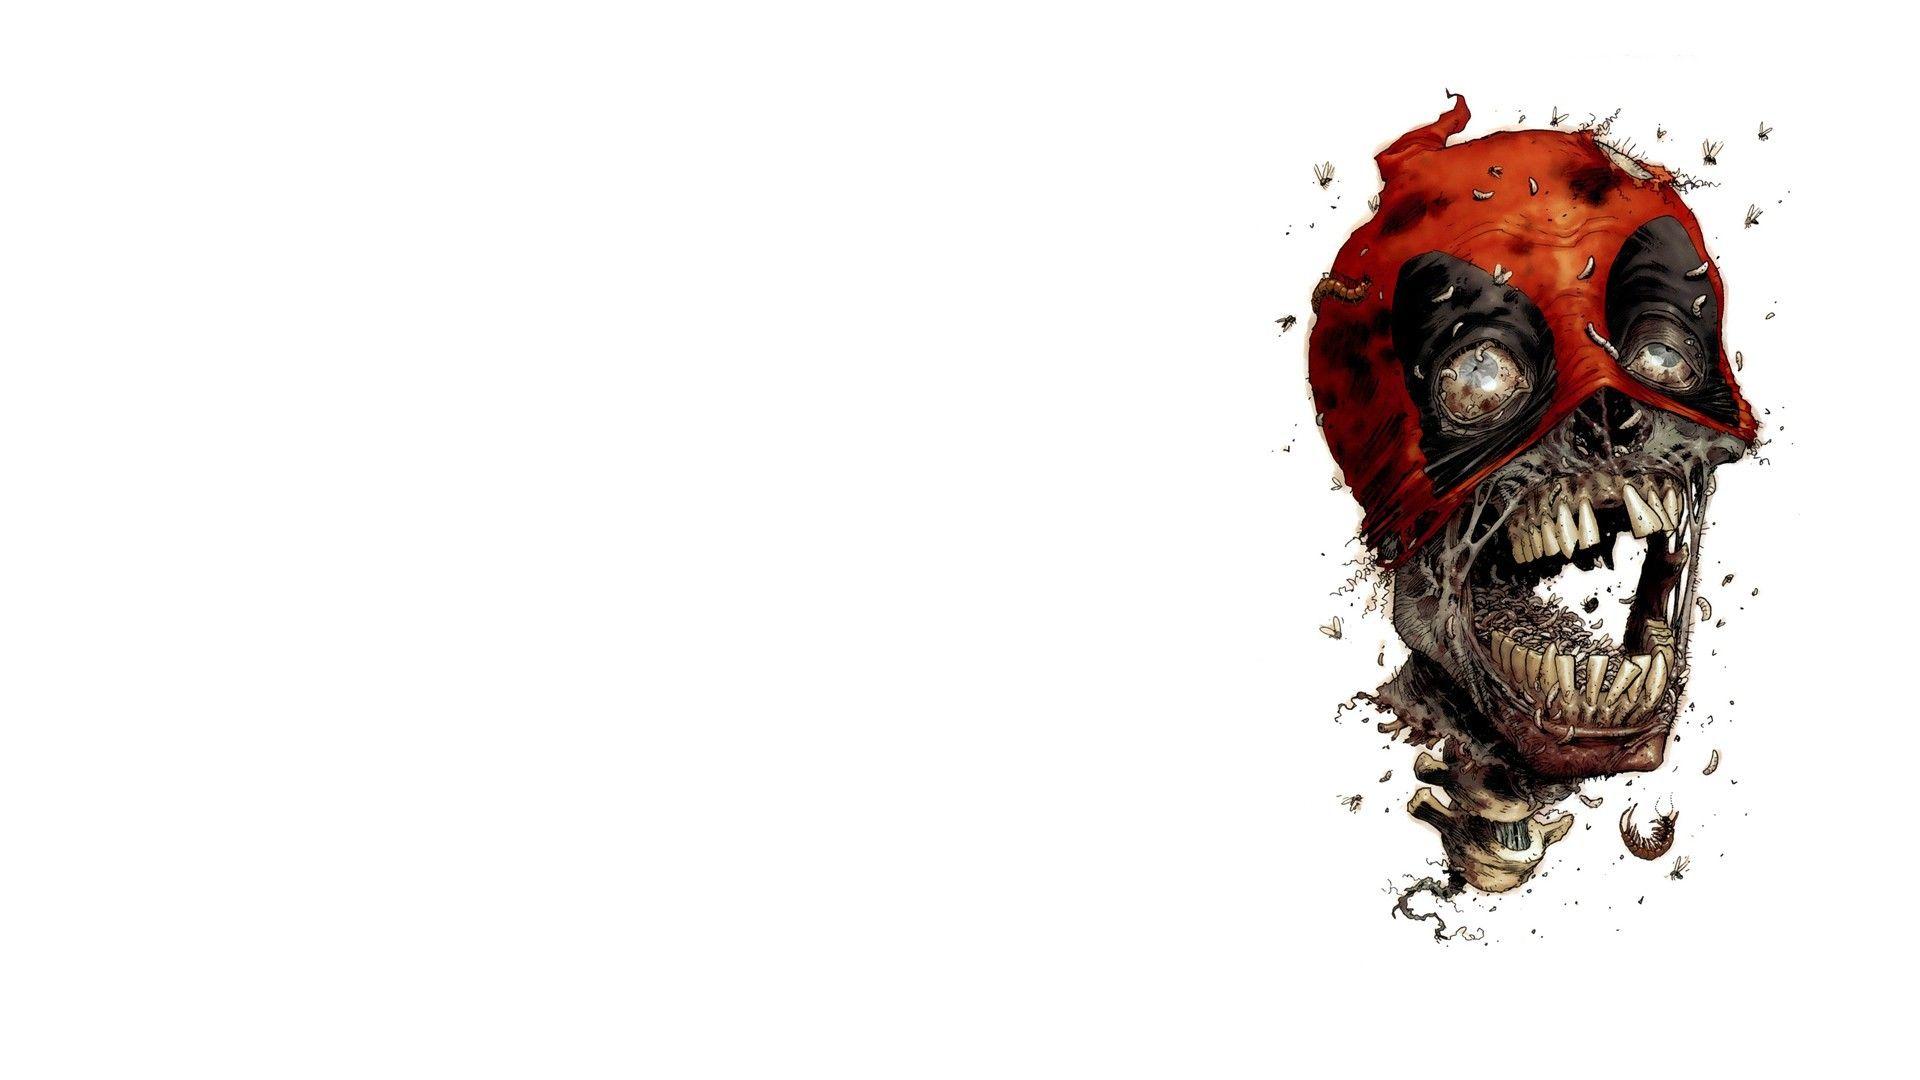 Zombies in the mask, white background wallpaper and image